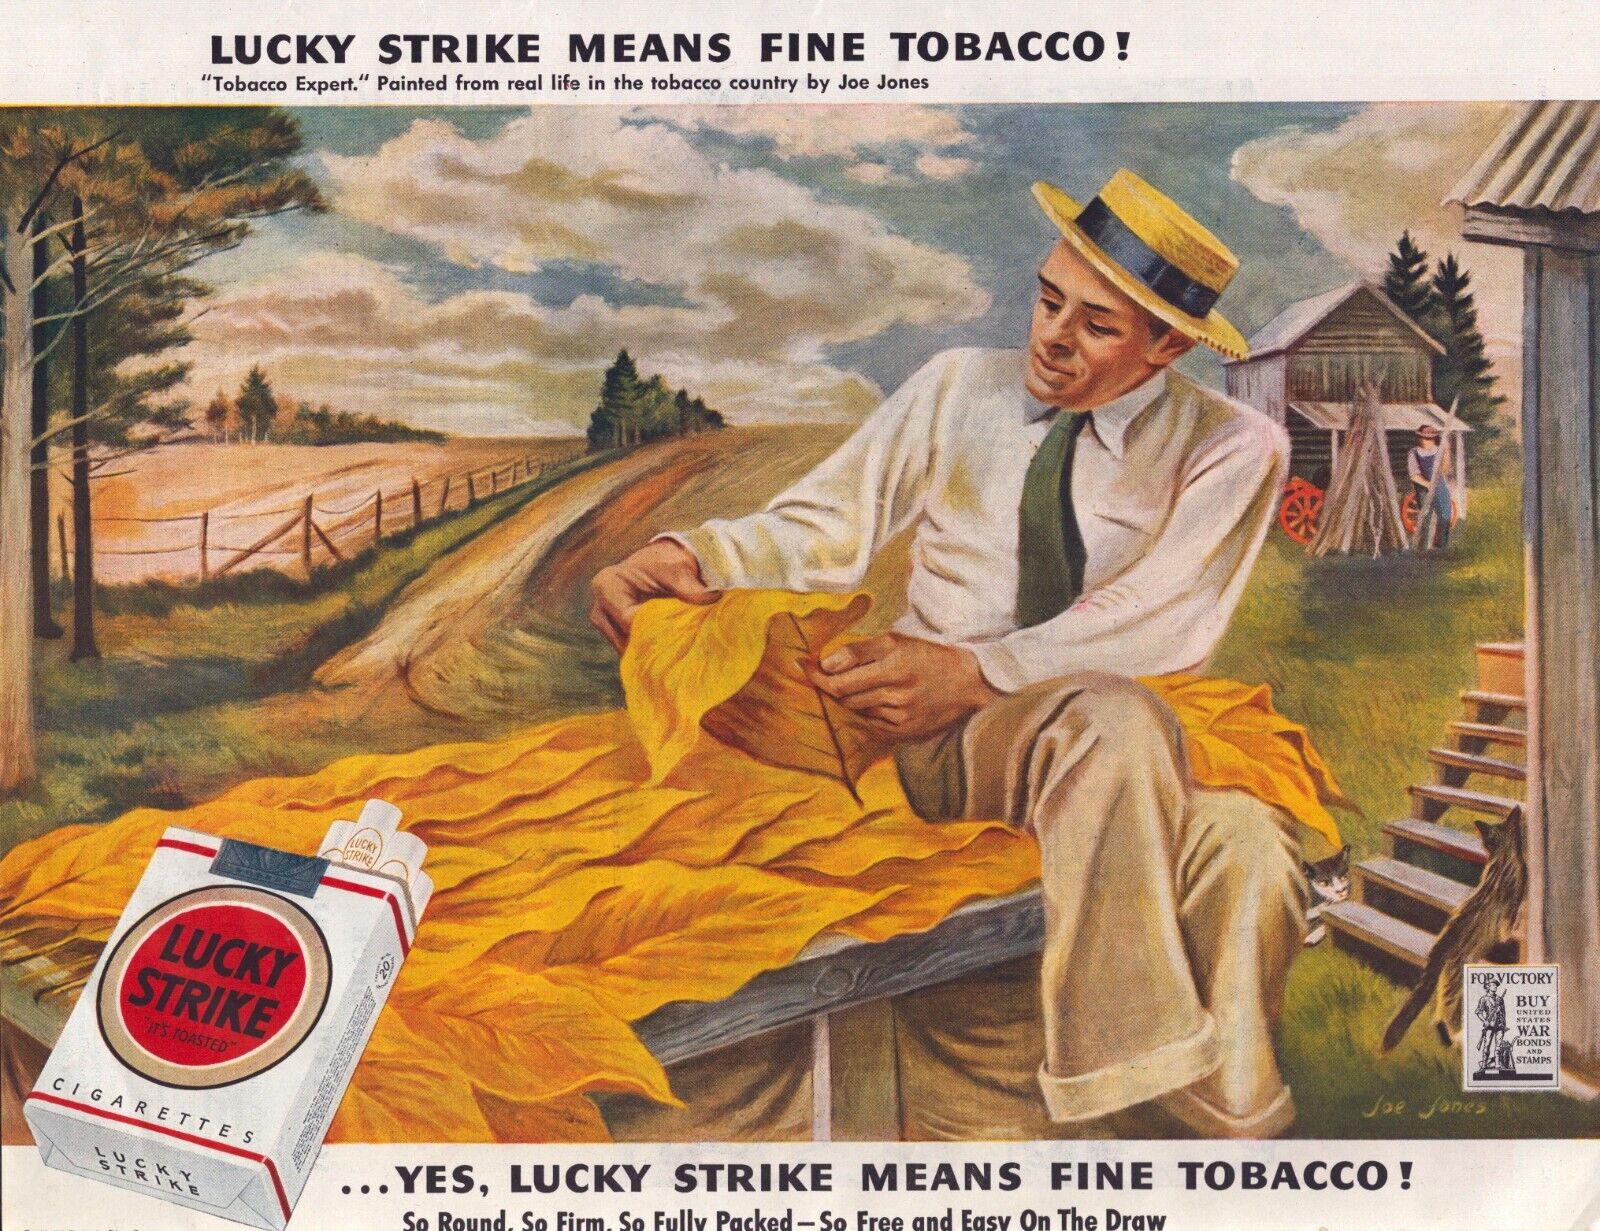 1943 Lucky Strike Cigarettes WWII Print Ad Tobacco Expert Leaves